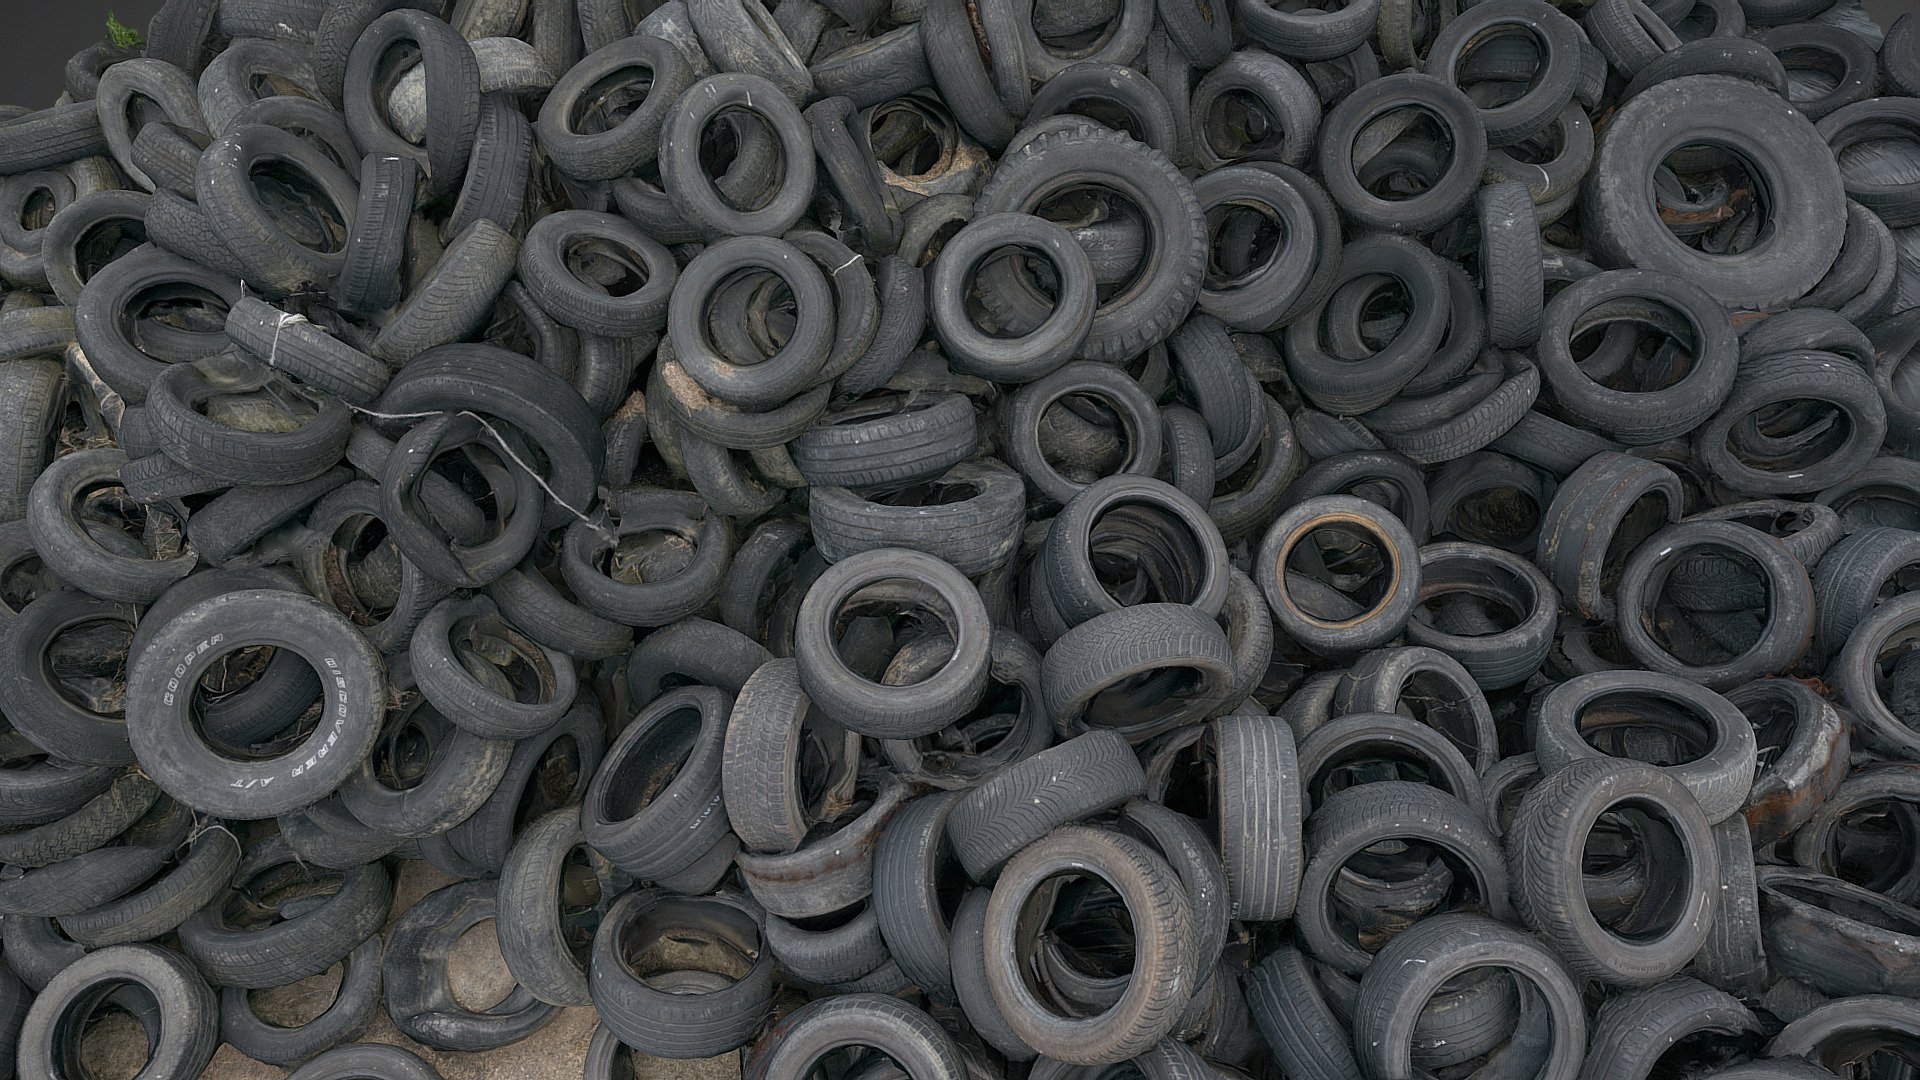 Dump recycling Pile heap stack old used vintage car tyres tires wheels waste dump with some leaves and mud dirt

photogrammetry scan (240x36mp), 5x8k textures + hd normals - Tire dump - Buy Royalty Free 3D model by matousekfoto 3d model